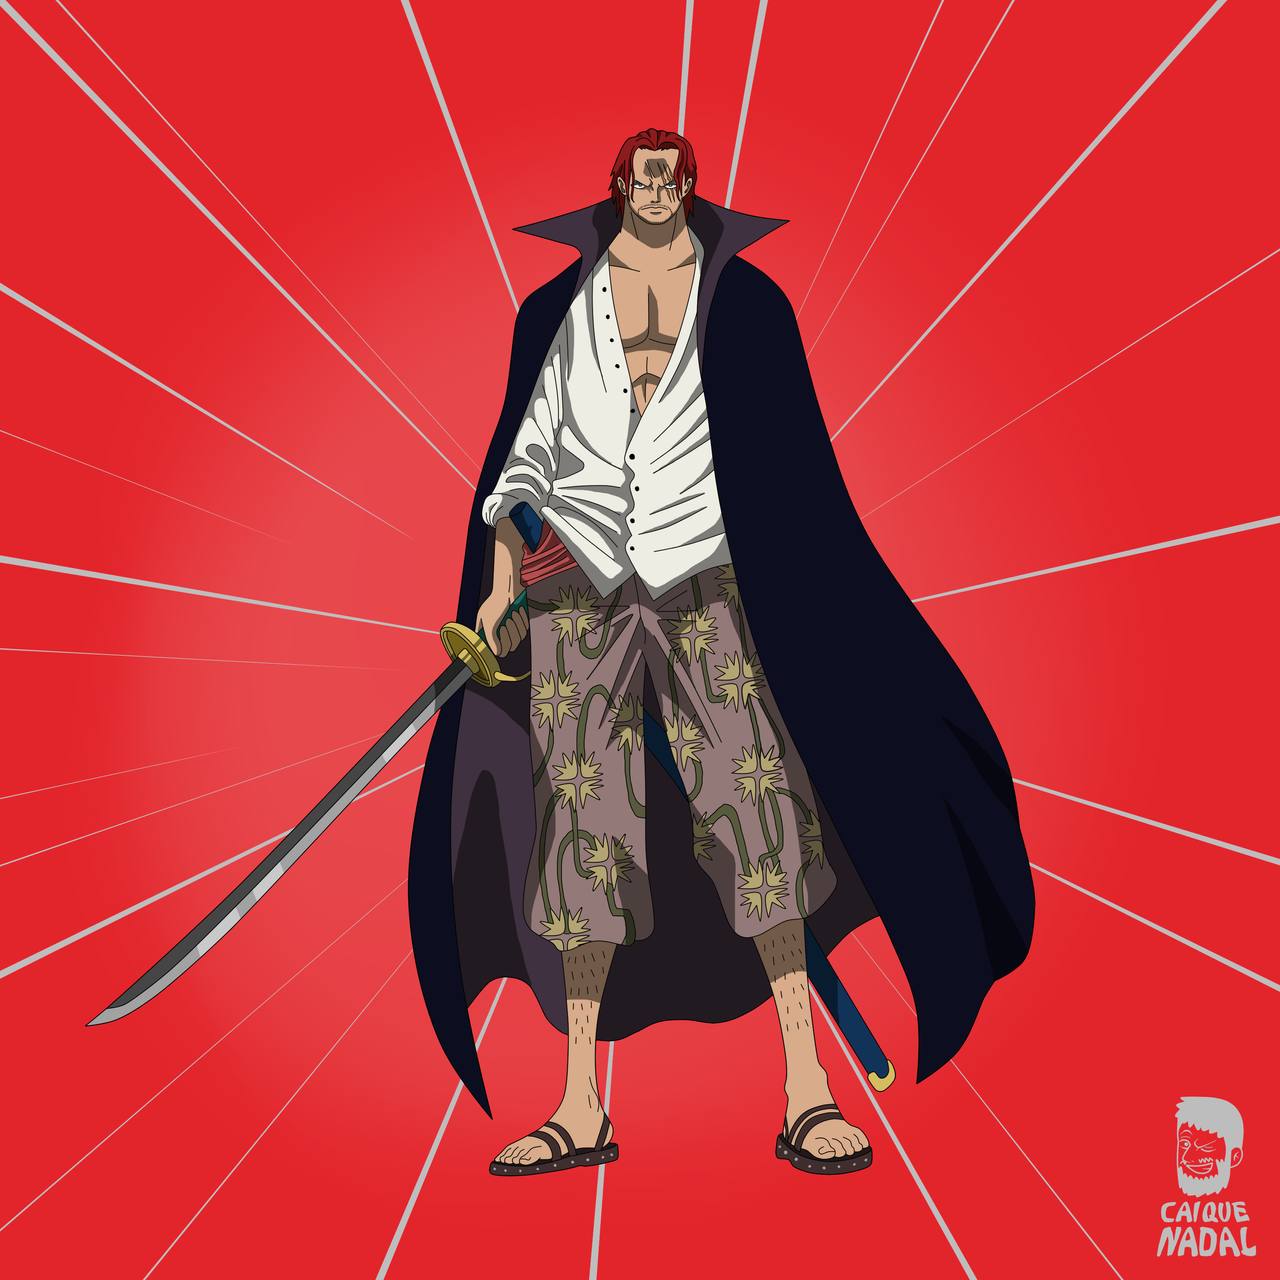 Who is Shanks in One Piece?